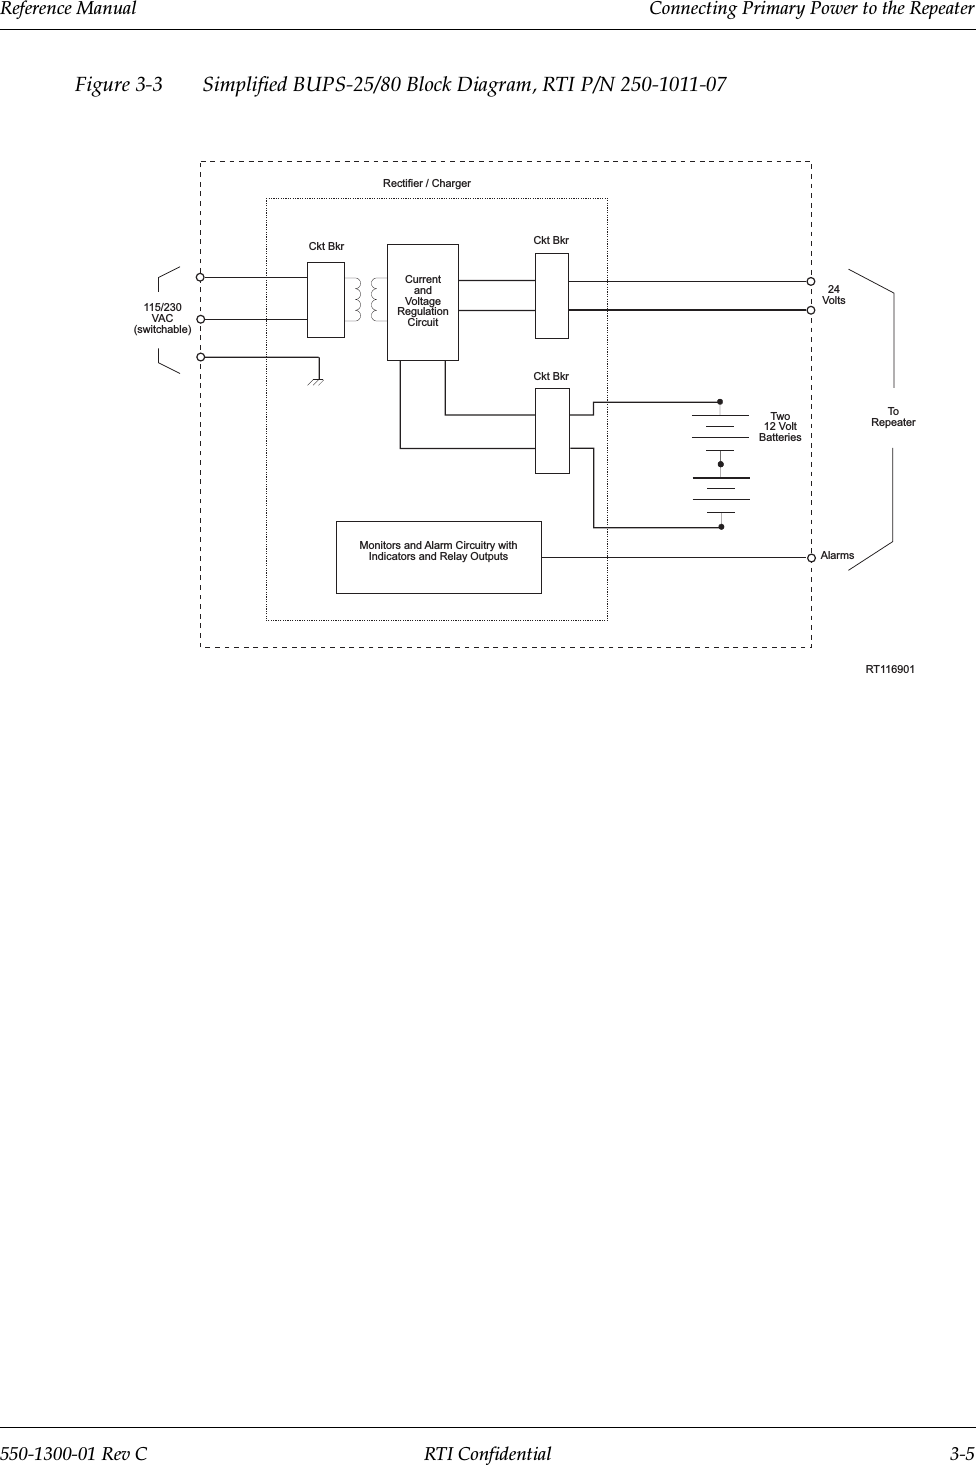 Reference Manual     Connecting Primary Power to the Repeater550-1300-01 Rev C RTI Confidential 3-5Figure 3-3 Simplified BUPS-25/80 Block Diagram, RTI P/N 250-1011-07Rectifier / ChargerCkt Bkr Ckt BkrCkt BkrTwo12 VoltBatteriesMonitors and Alarm Circuitry withIndicators and Relay OutputsCurrentandVoltageRegulationCircuit115/230VAC(switchable)ToRepeater24VoltsAlarmsRT116901